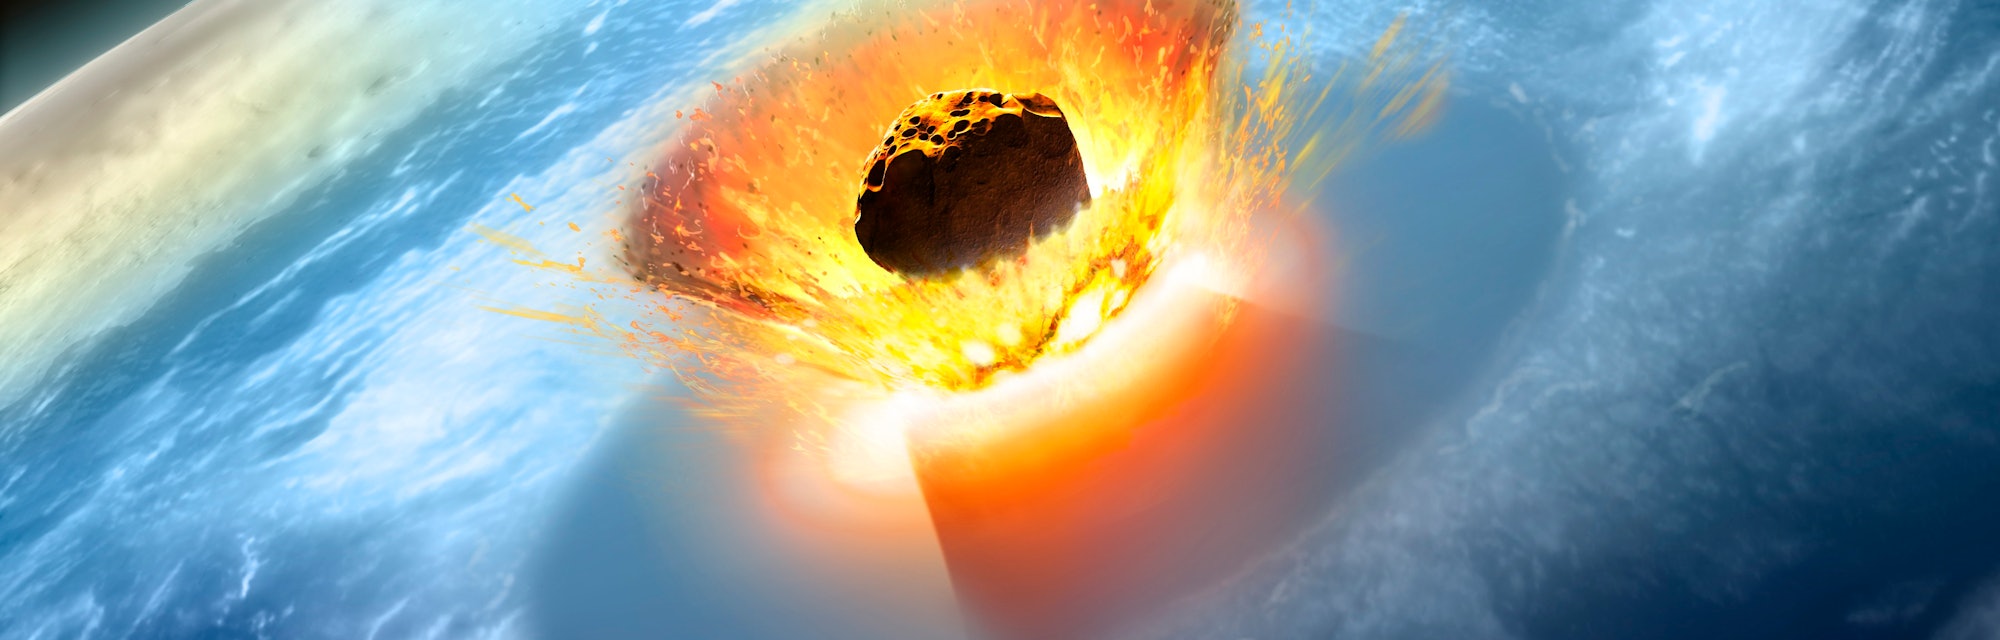 Asteroid impact. Illustration of a large asteroid colliding with Earth on the Yucatan Peninsula in (...